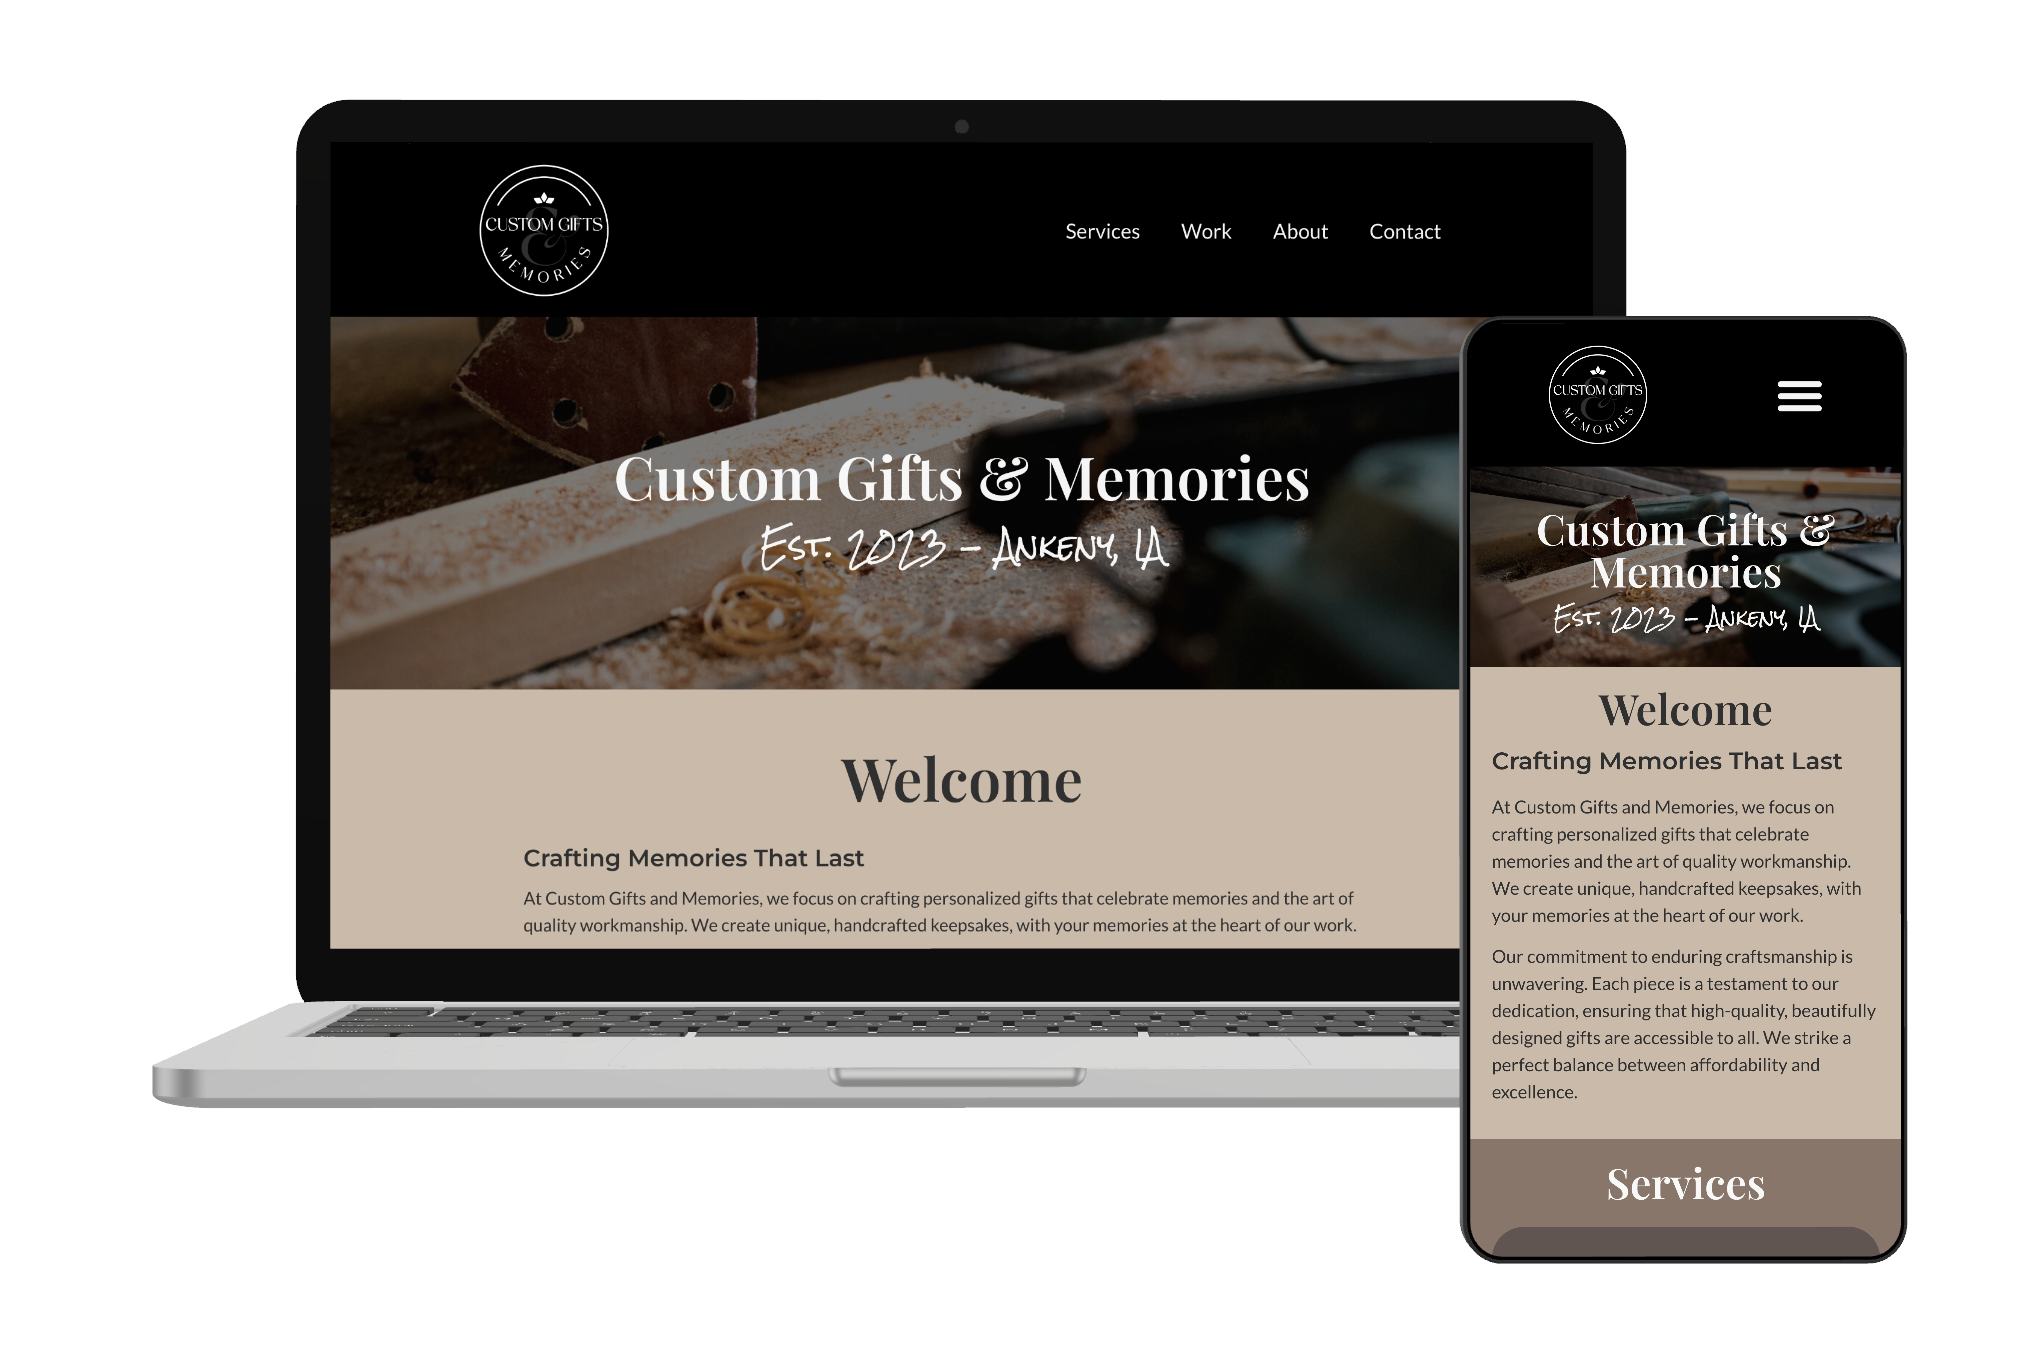 Visual mockup of Custom Gifts & Memories website rendered on a laptop and smartphone.